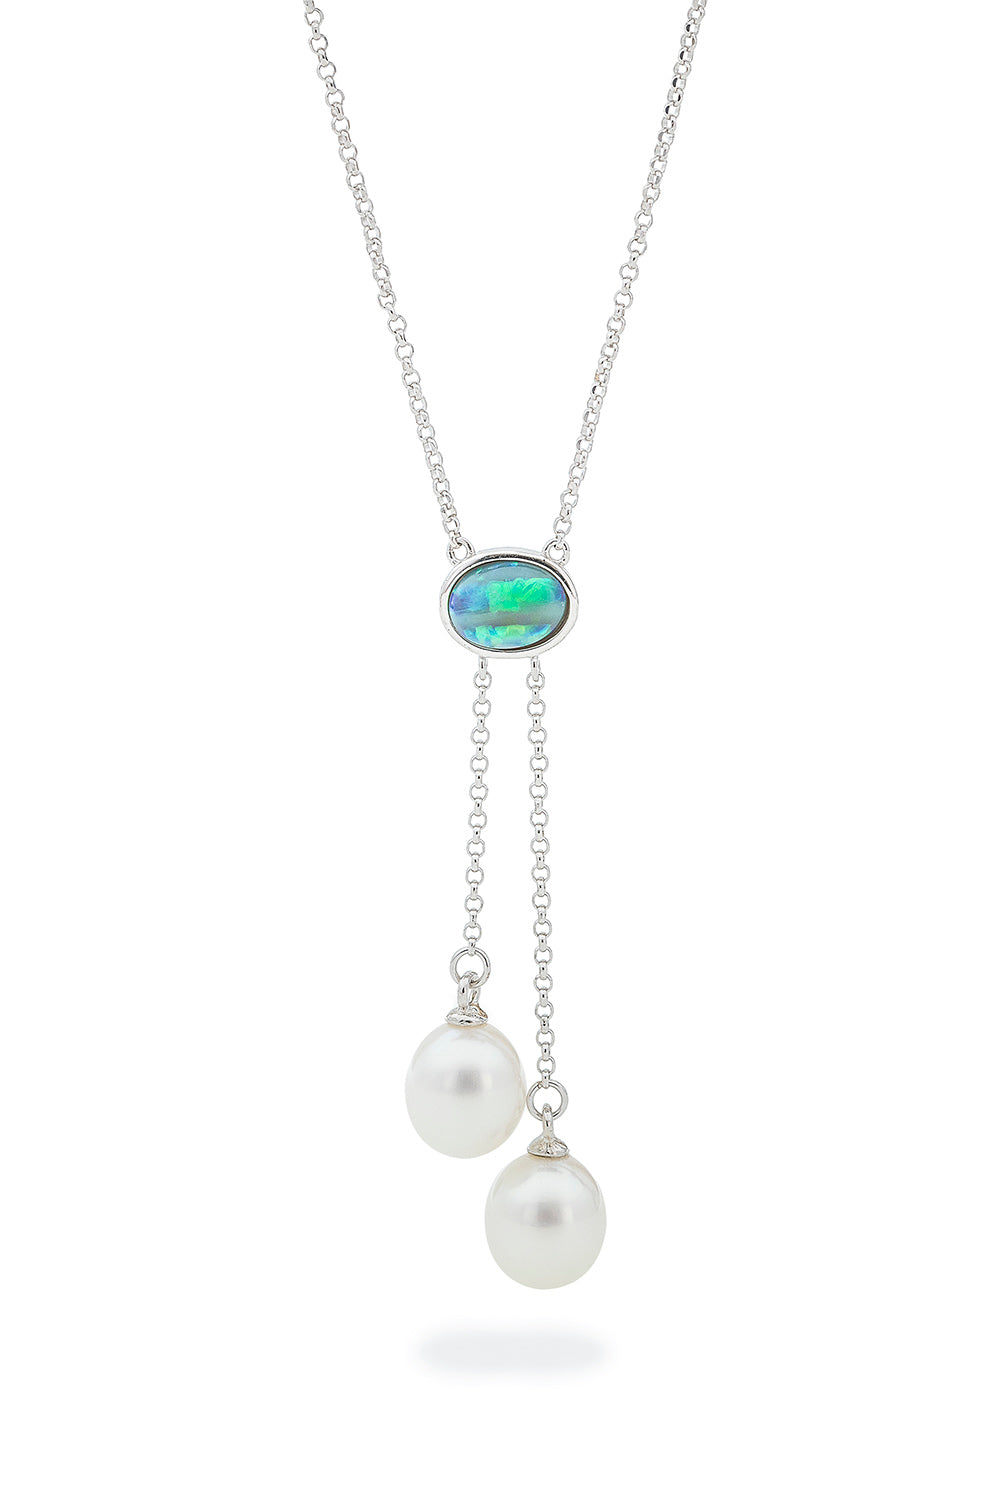 Ikecho Sterling Silver Light Solid Opal & Fresh Water Pearl Lariat Necklace